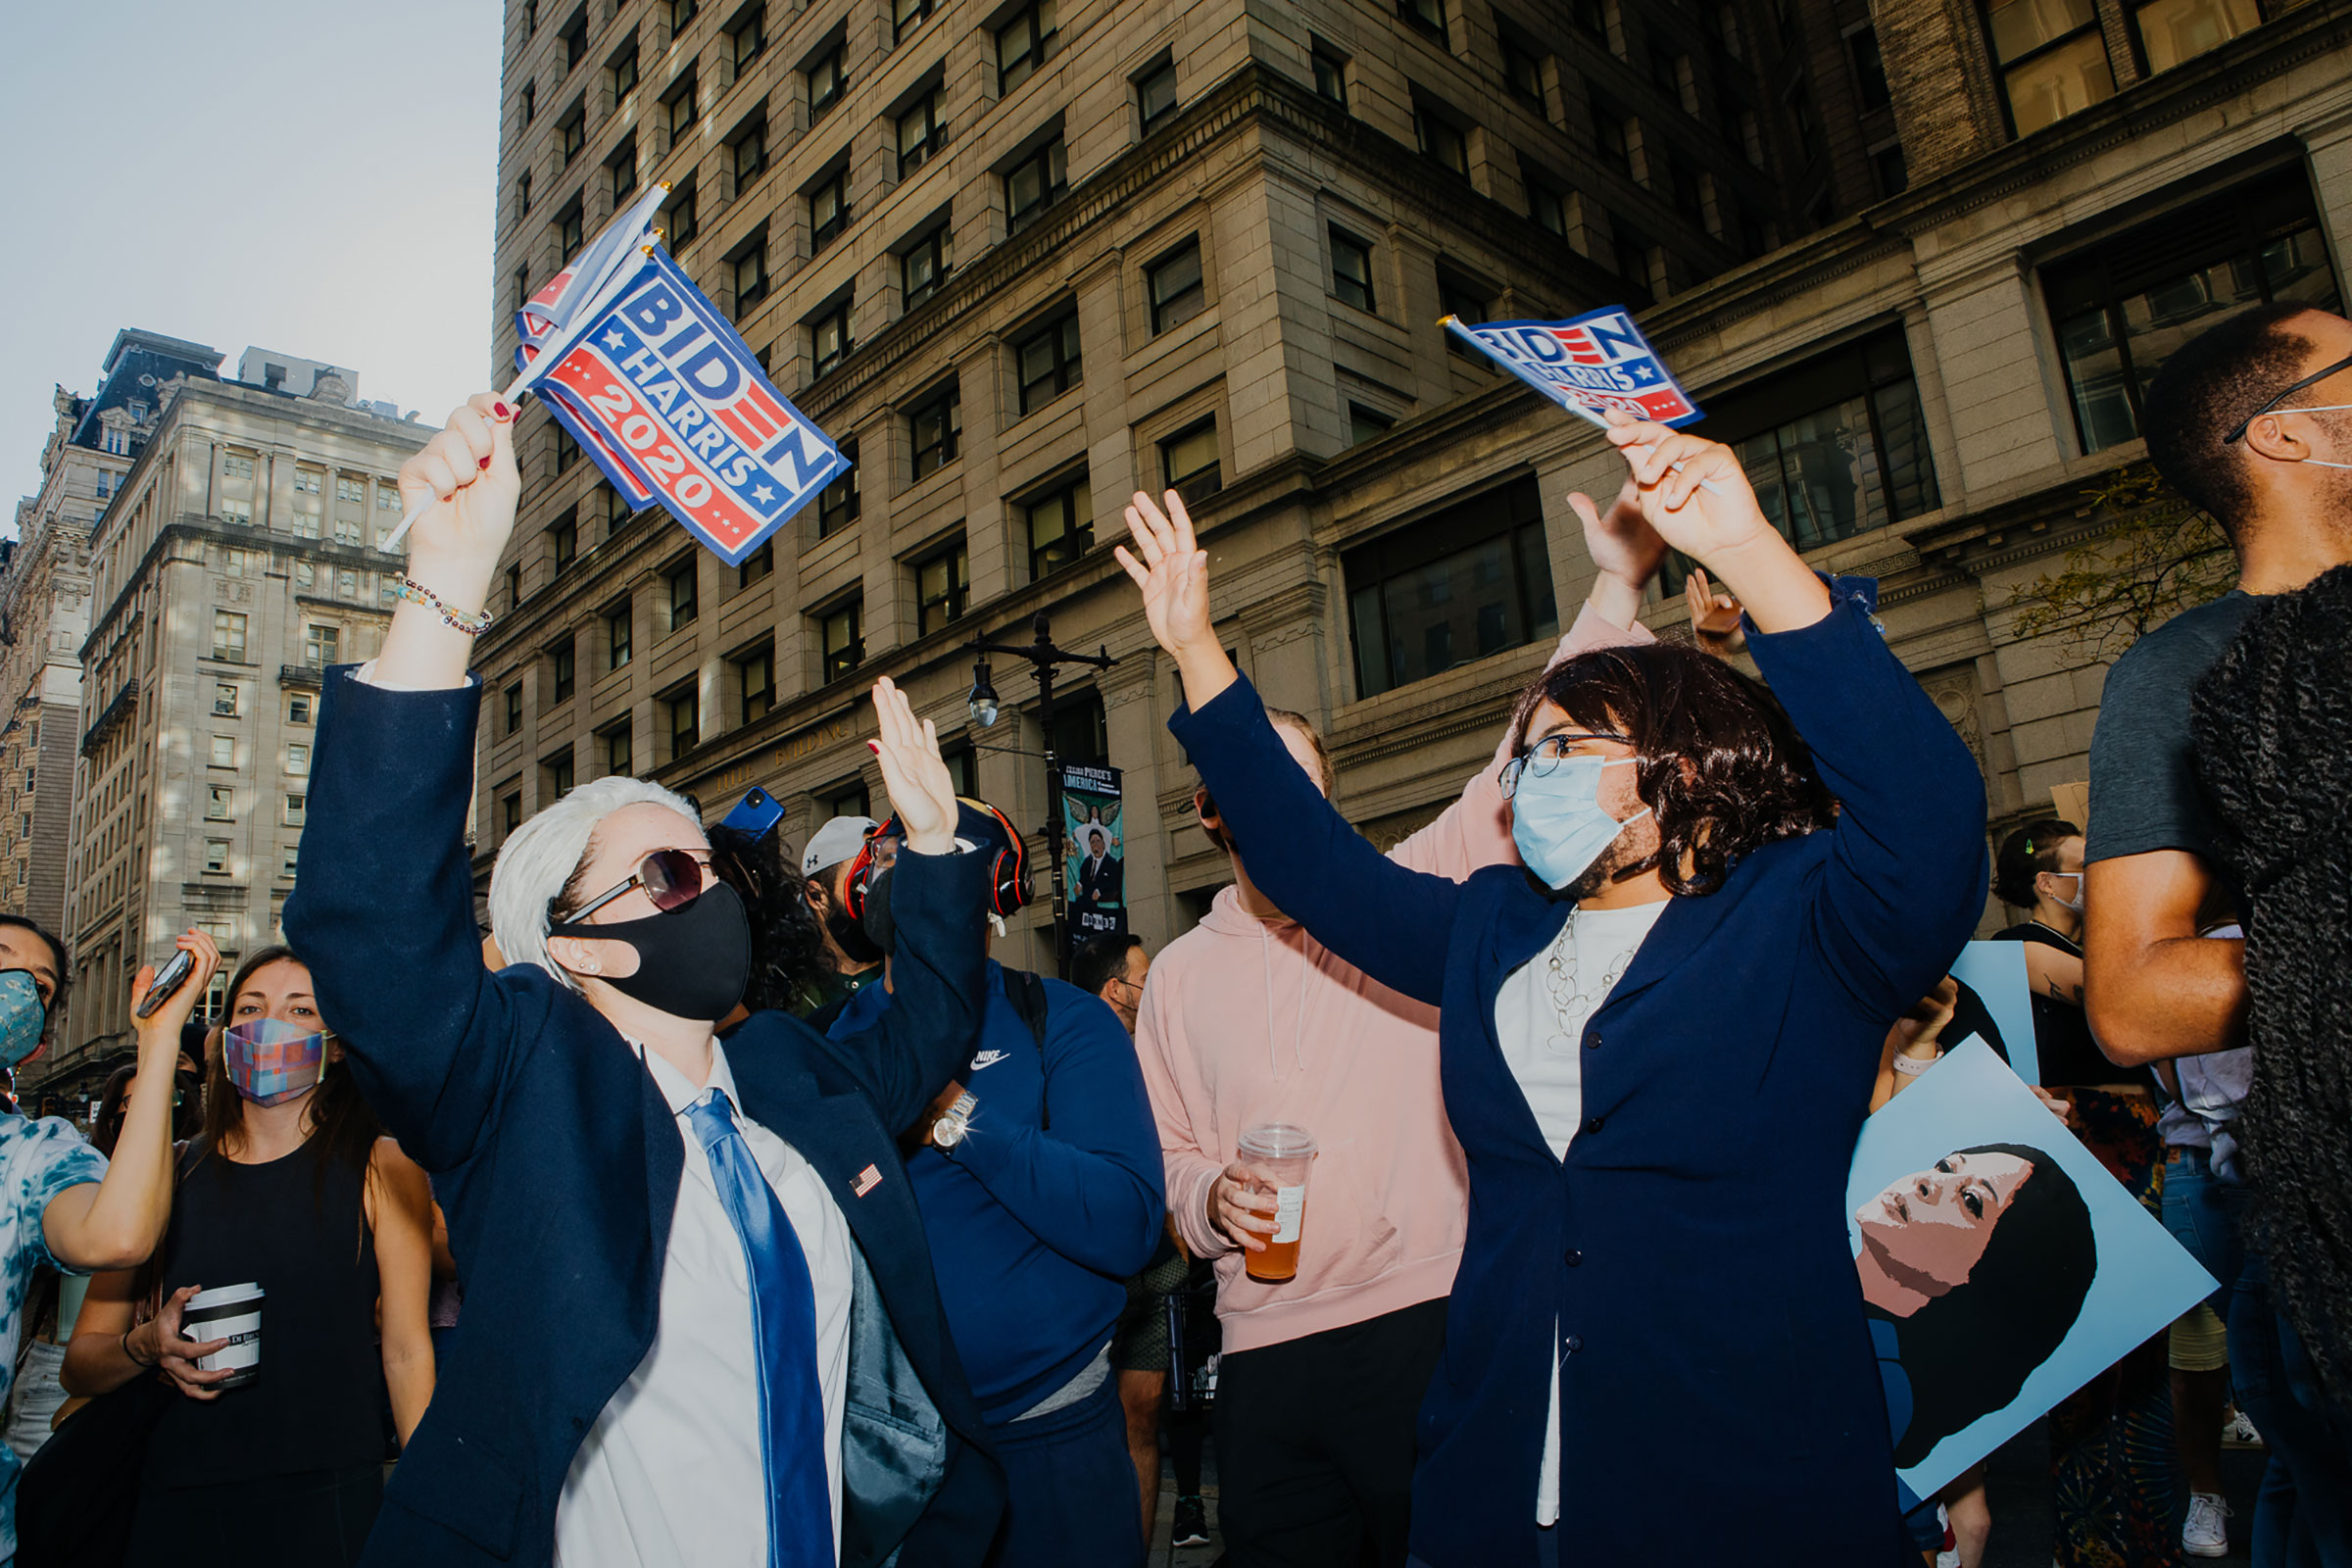 Katelyn Barbour, dressed as President-Elect Joe Biden, and Justin Procope, dressed as Vice President-Elect Kamala Harris, celebrate on Broad Street in downtown Philadelphia on Nov. 7, 2020. (Michelle Gustafson for TIME)